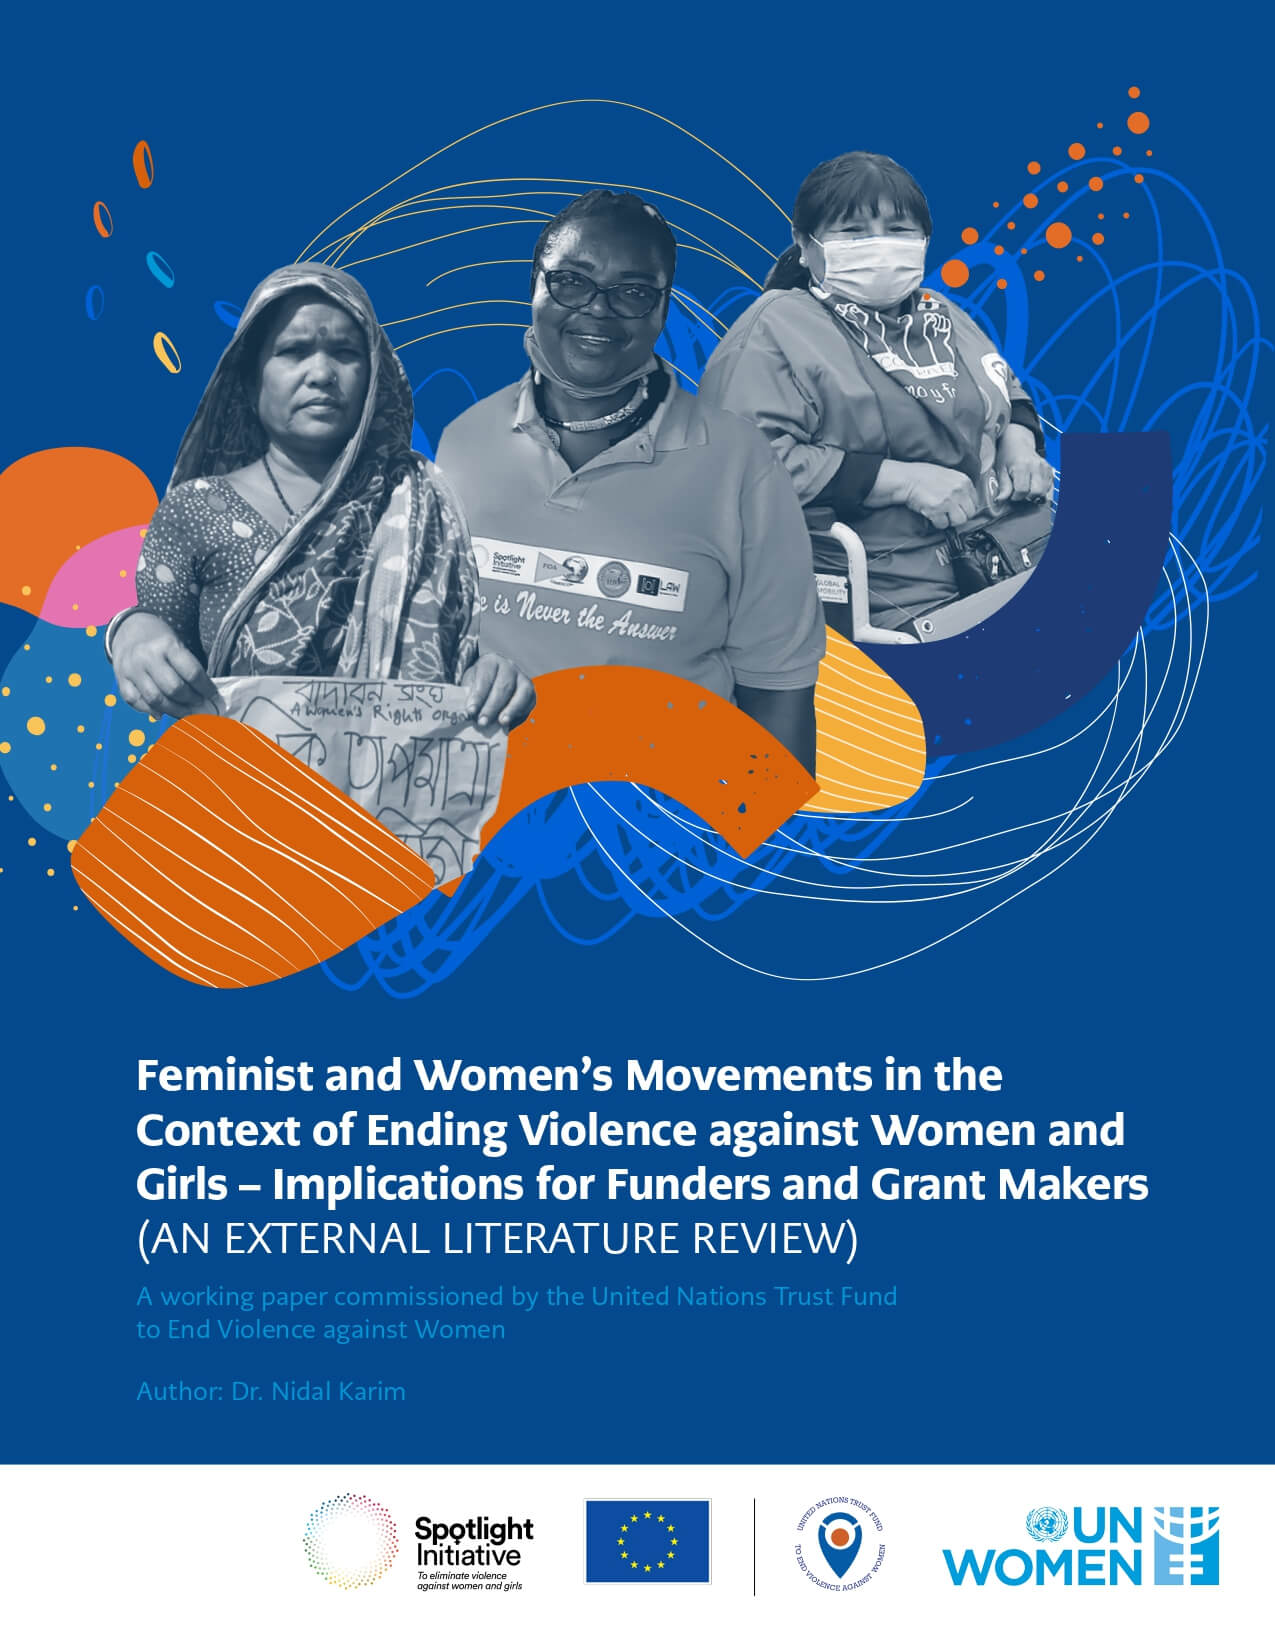 Feminist and Women’s Movements in the Context of Ending Violence against Women and Girls – Implications for Funders and Grant Makers (an External Literature Review)Feminist and Women’s Movements in the Context of Ending Violence against Women and Girls – Implications for Funders and Grant Makers (an External Literature Review)